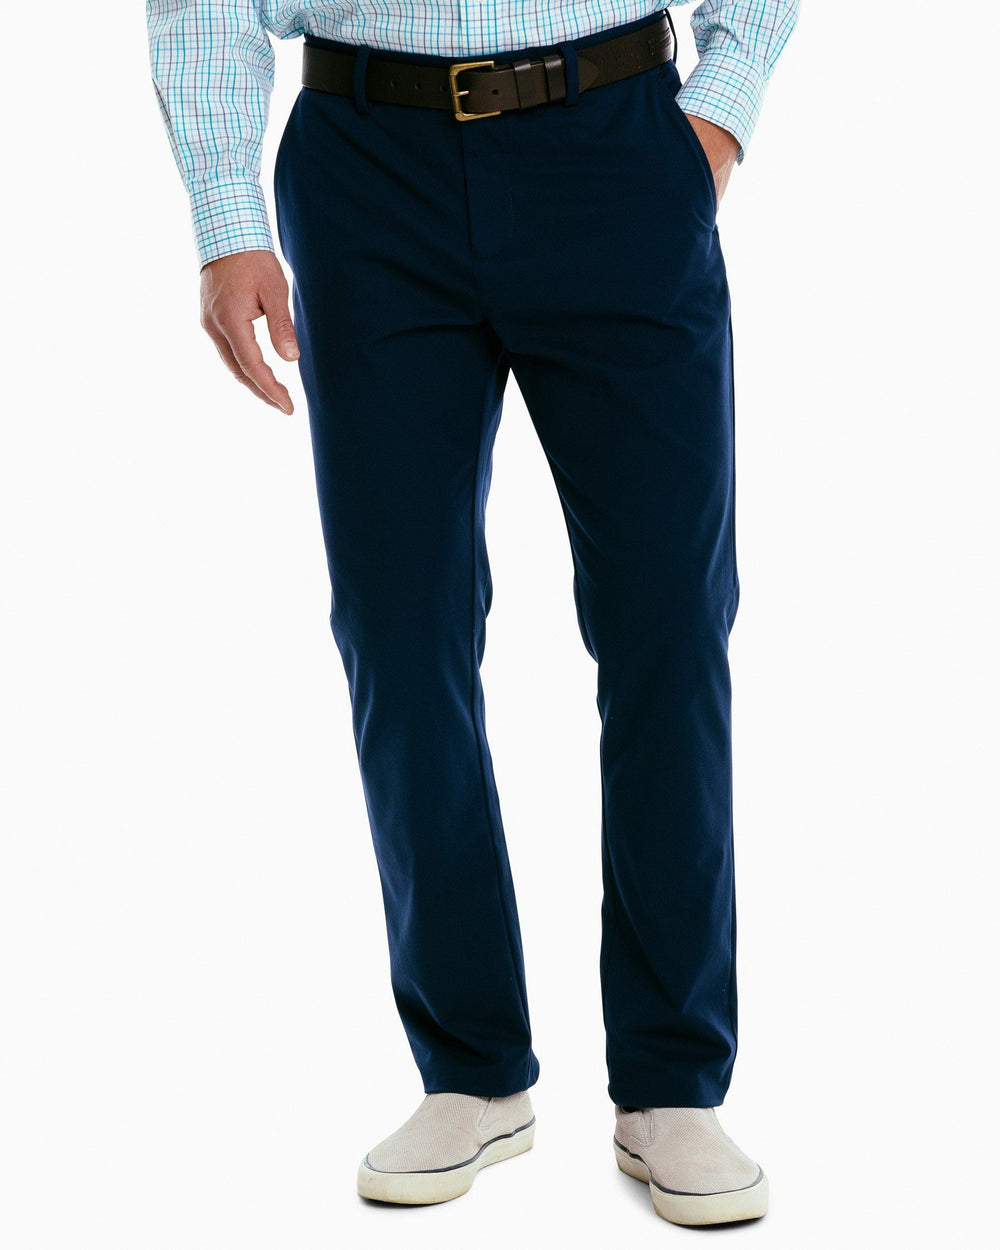 The front view of the Men's Jack Performance Pant by Southern Tide - True Navy